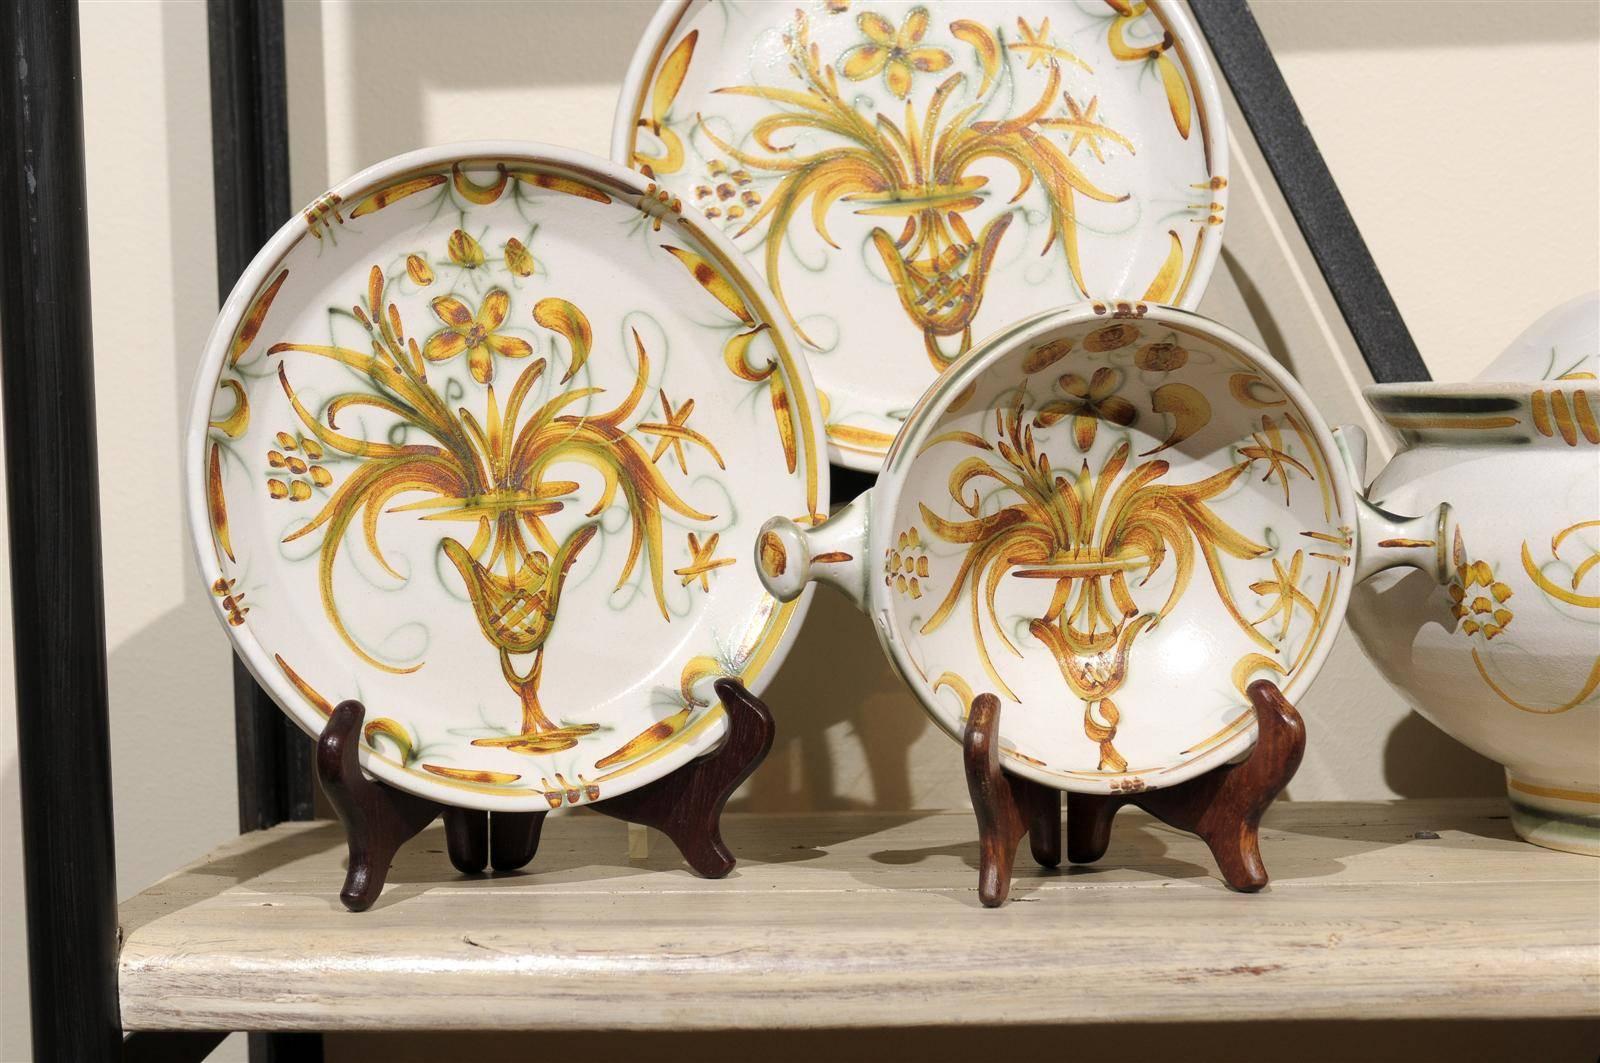 Set of Midcentury Quimper Tableware in a Gold and Green Pattern, circa 1970 For Sale 1